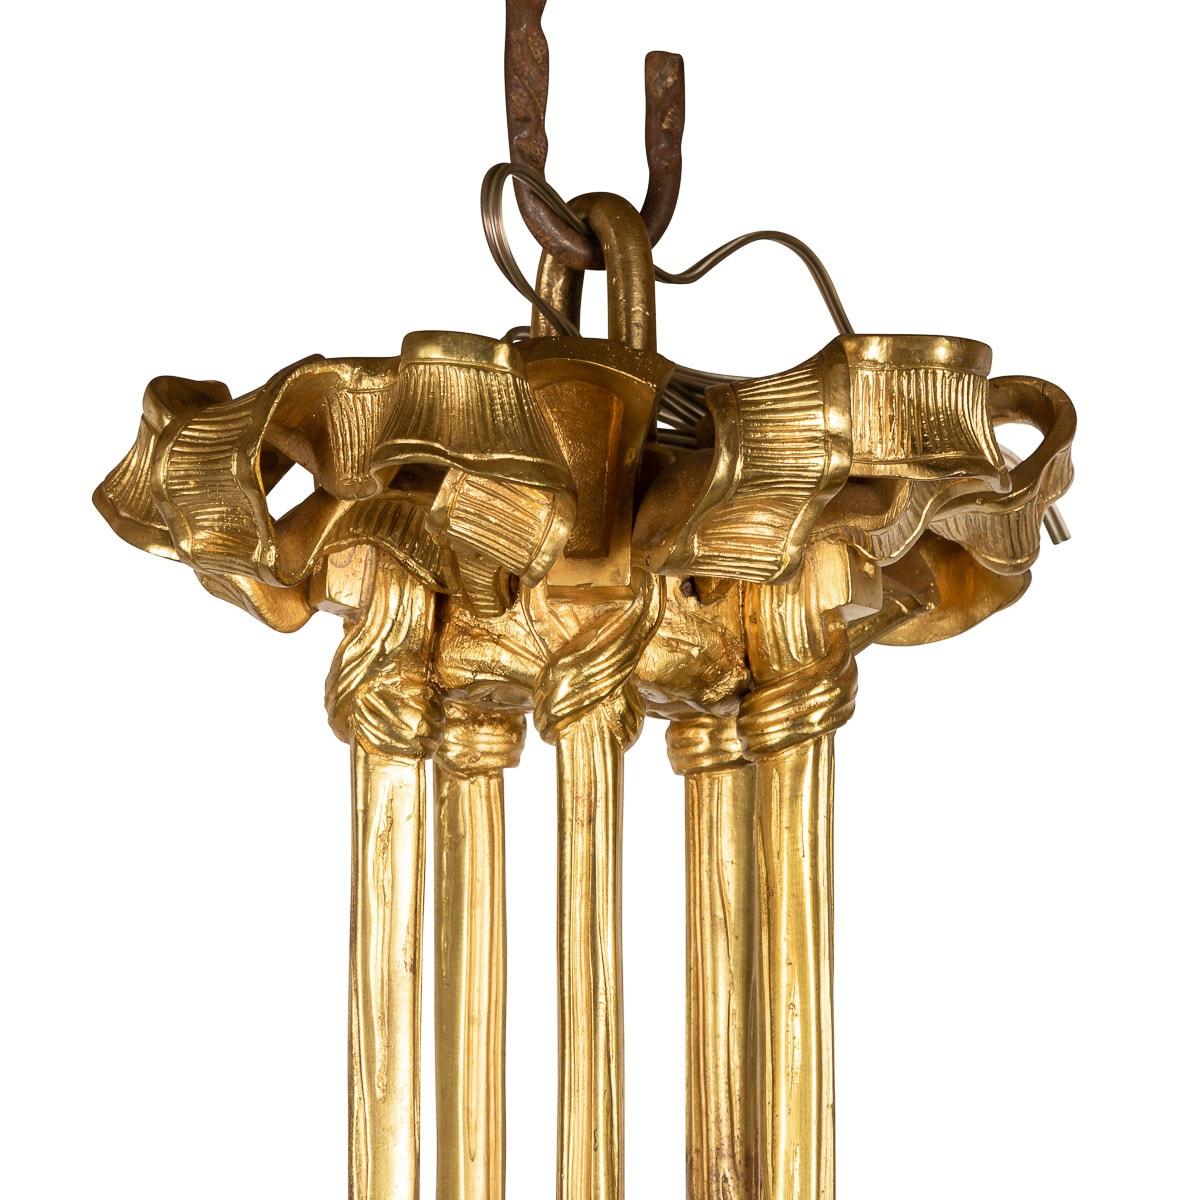 Bronze 19th Century French Empire Ormolu Chandelier With Trumpet Light Fittings, c.1870 For Sale